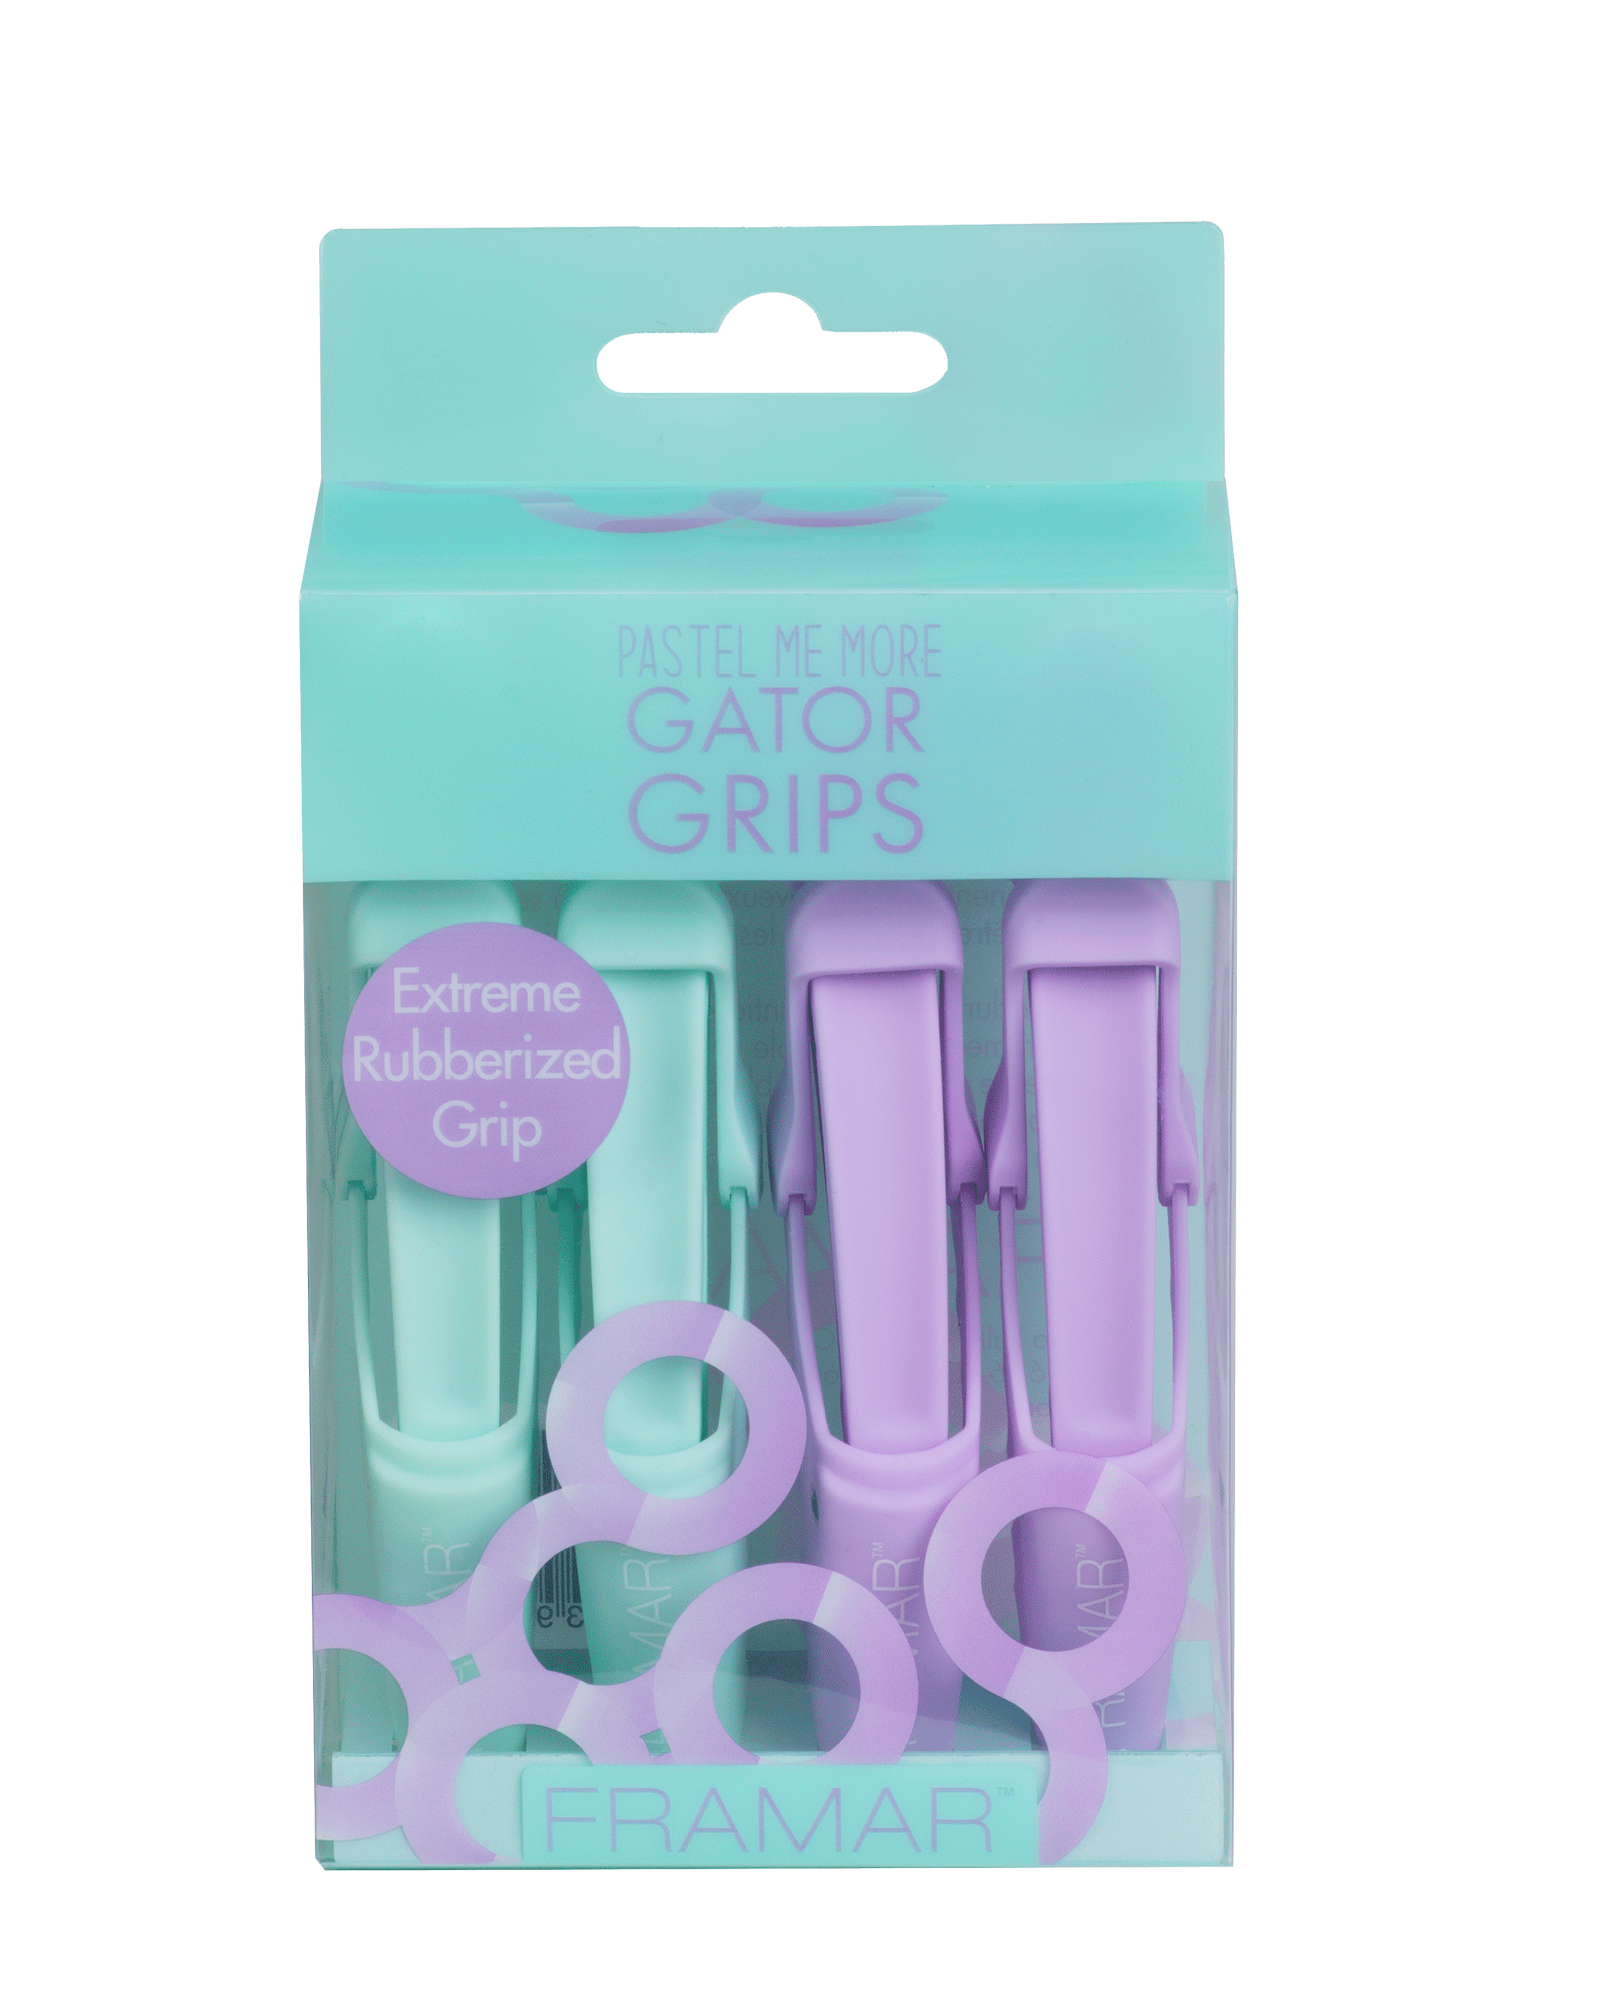 Framar Clips - Gator Grips (Pastel Me More) - Creata Beauty - Professional Beauty Products